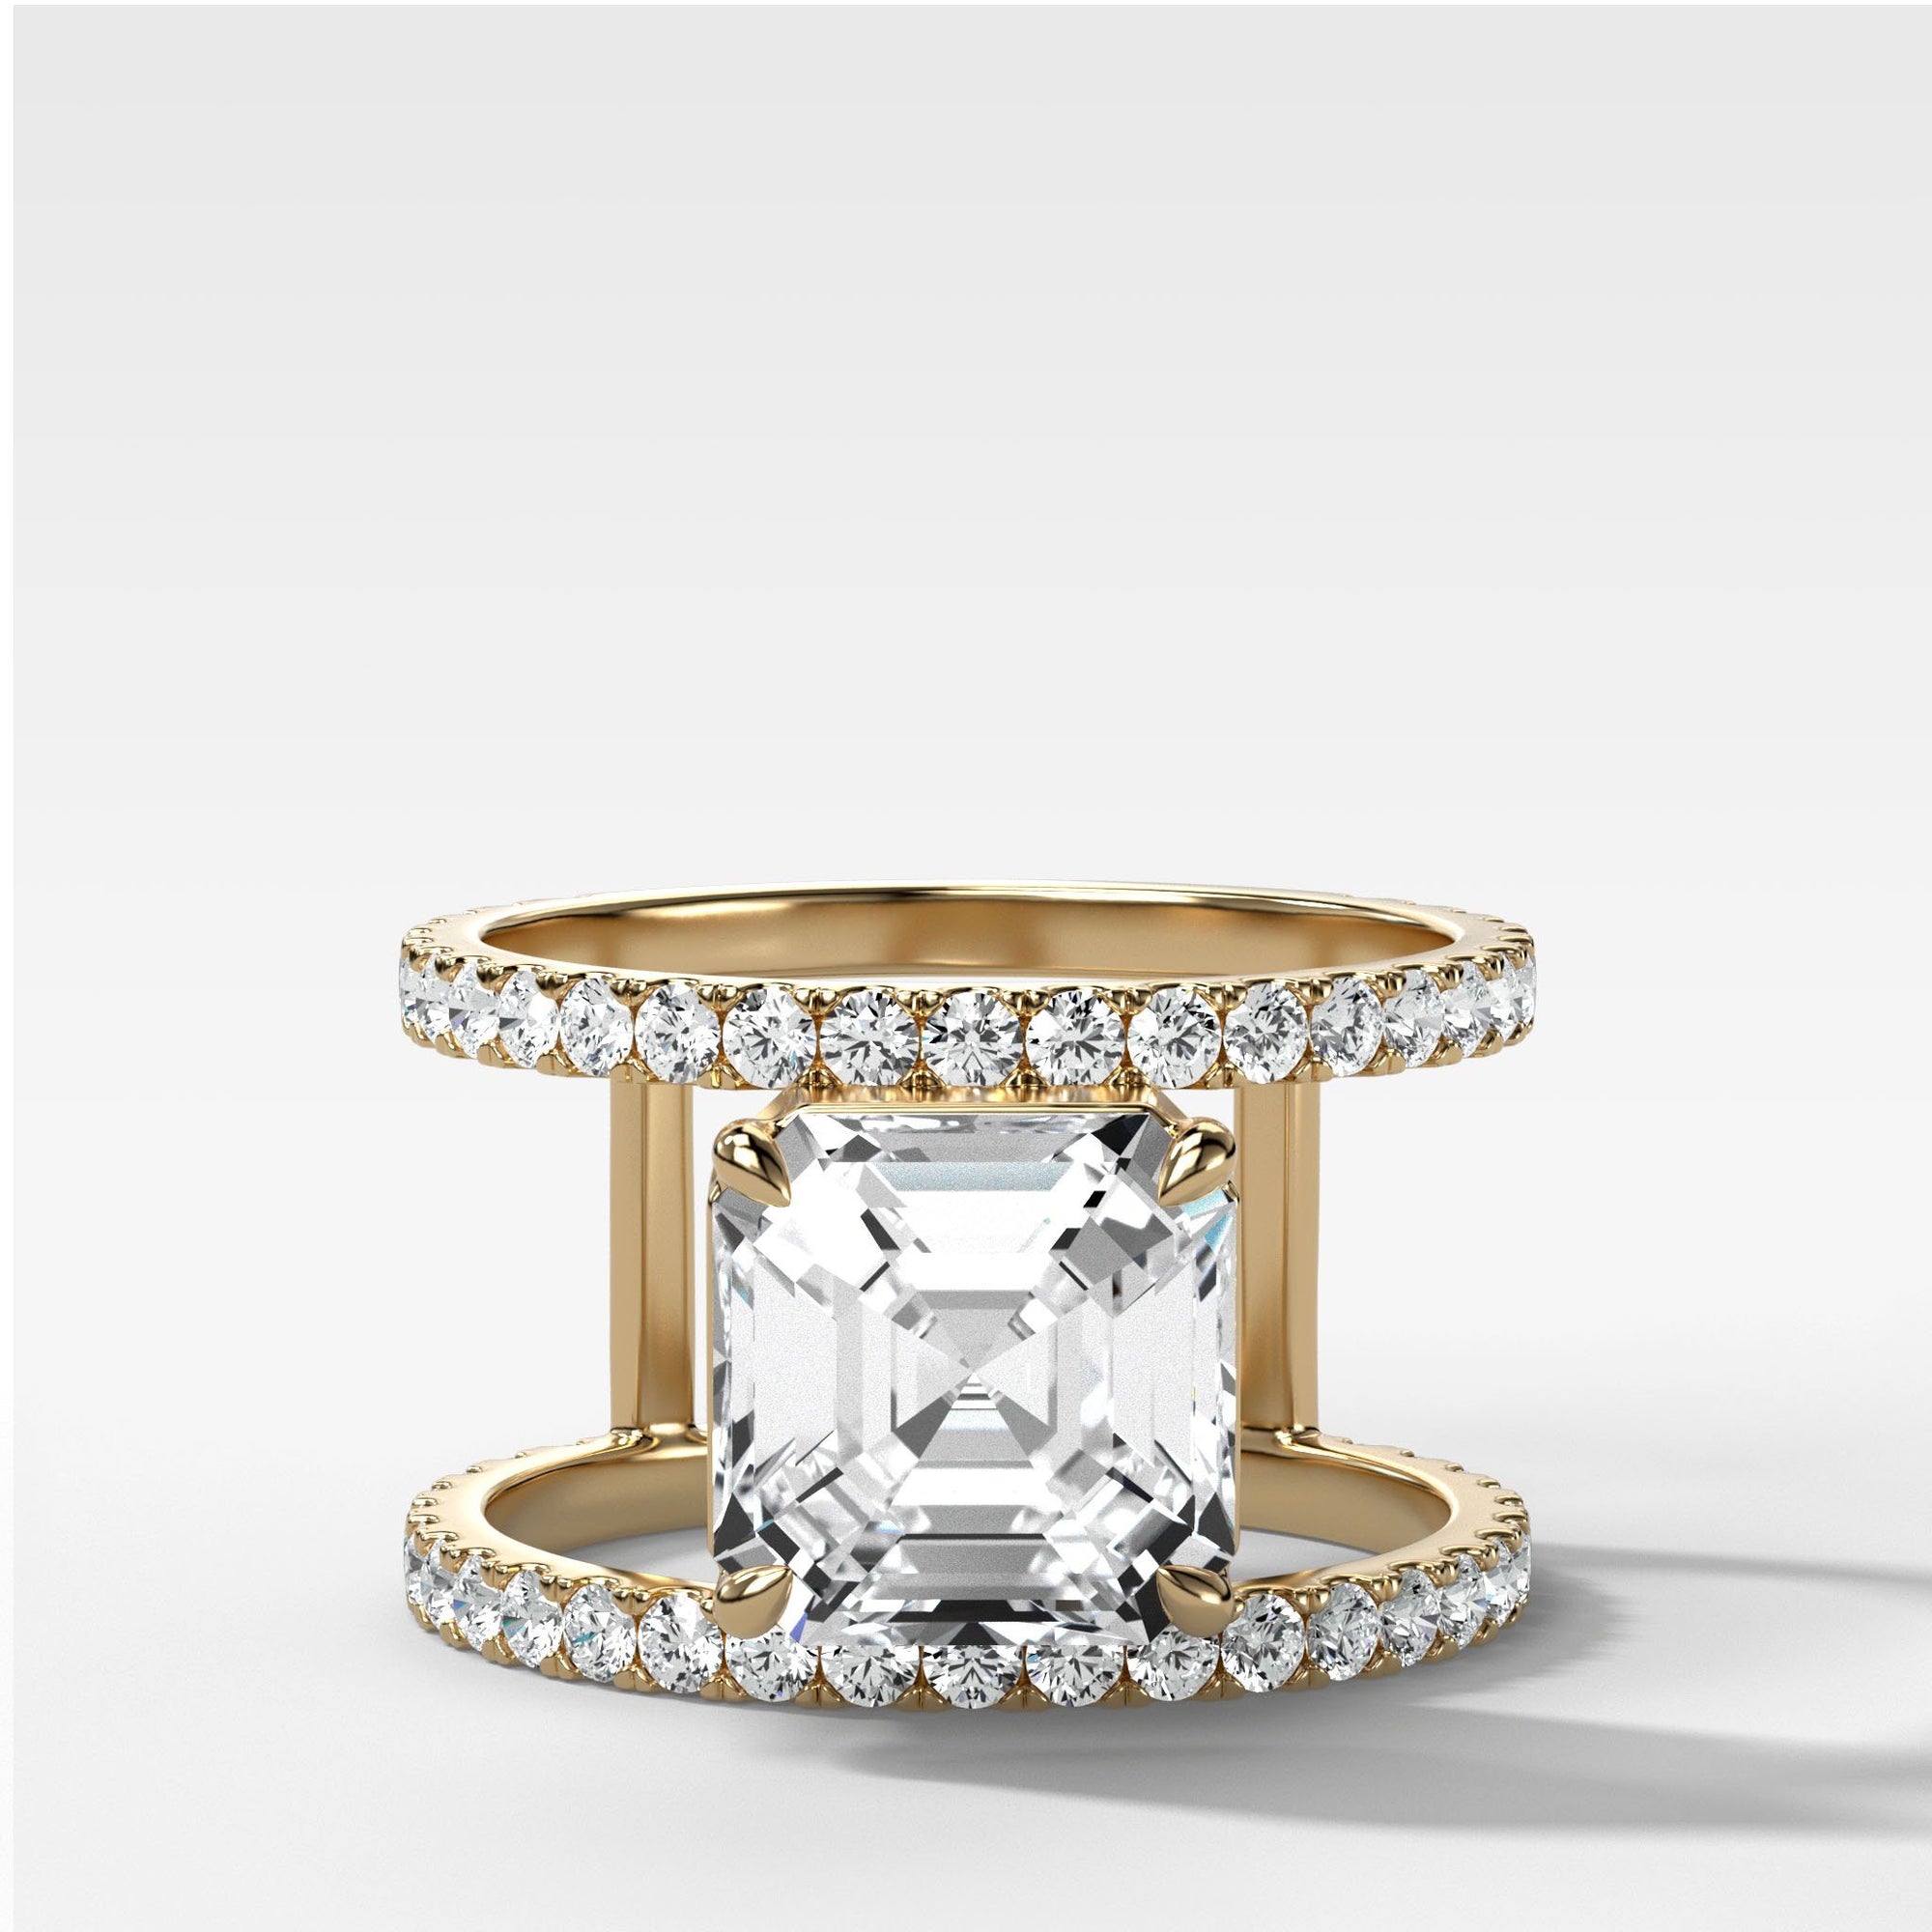 Double Row Gap Engagement Ring With Asscher Cut by Good Stone in Yellow Gold